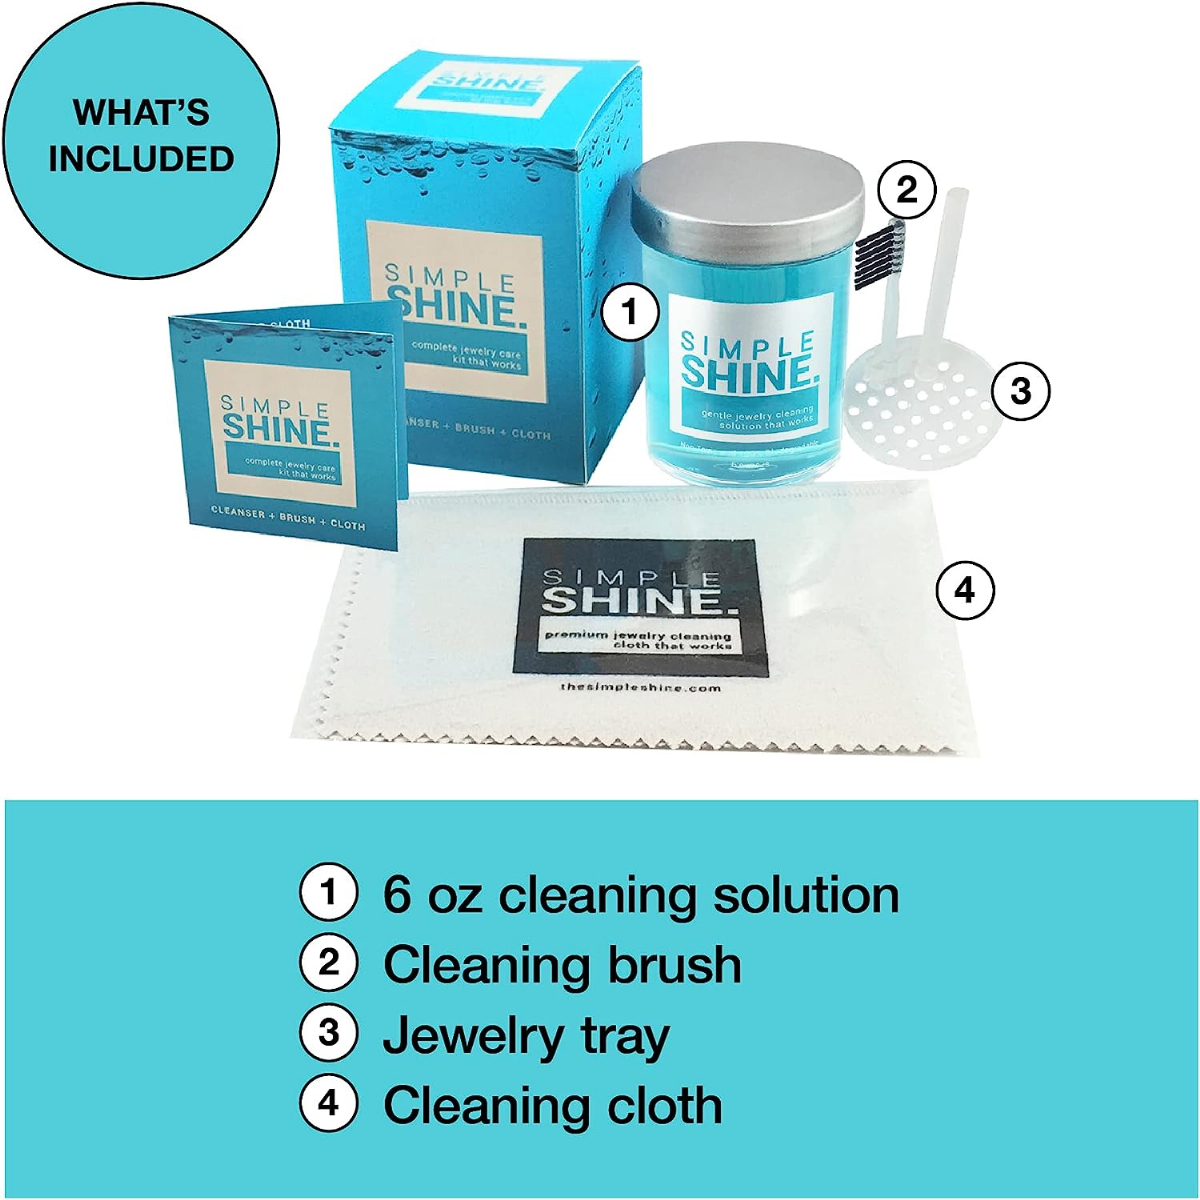 Simple Shine. Complete Jewelry Cleaning Kit Polishing w/Cloth, Brush and  Jewelry Cleaner Solution for all Jewelry. Gold, Silver, Diamond Ring  Cleaner, Earring, Fine & Fashion Cleaning Made in the USA Gentle Jewelry